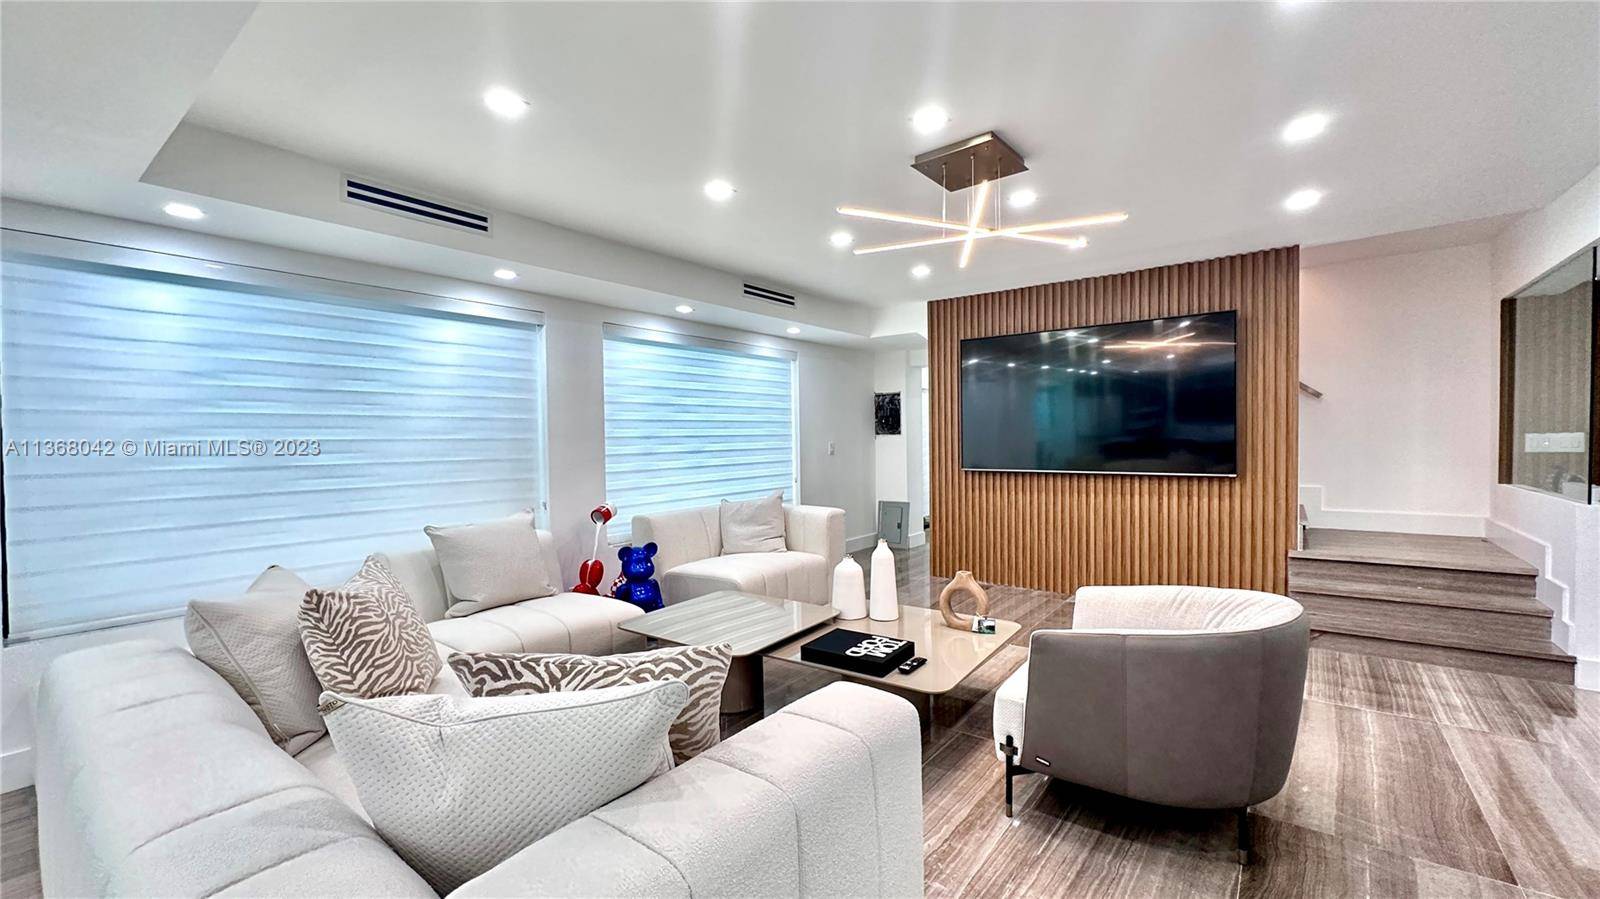 Look no further if you are looking for a modern masterpiece nestled in the heart of Aventura.